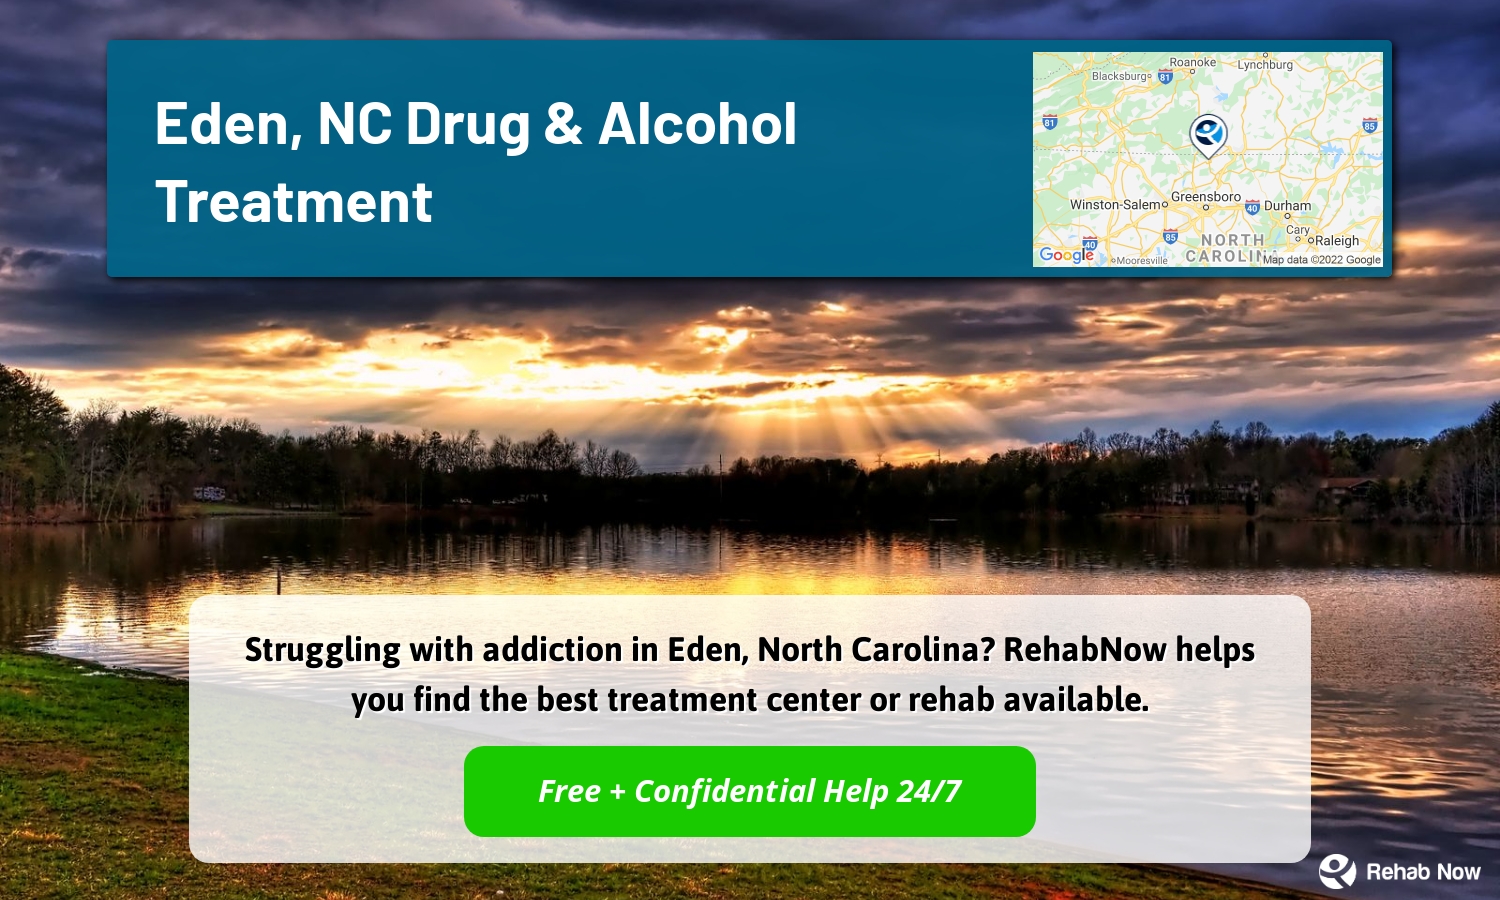 Struggling with addiction in Eden, North Carolina? RehabNow helps you find the best treatment center or rehab available.